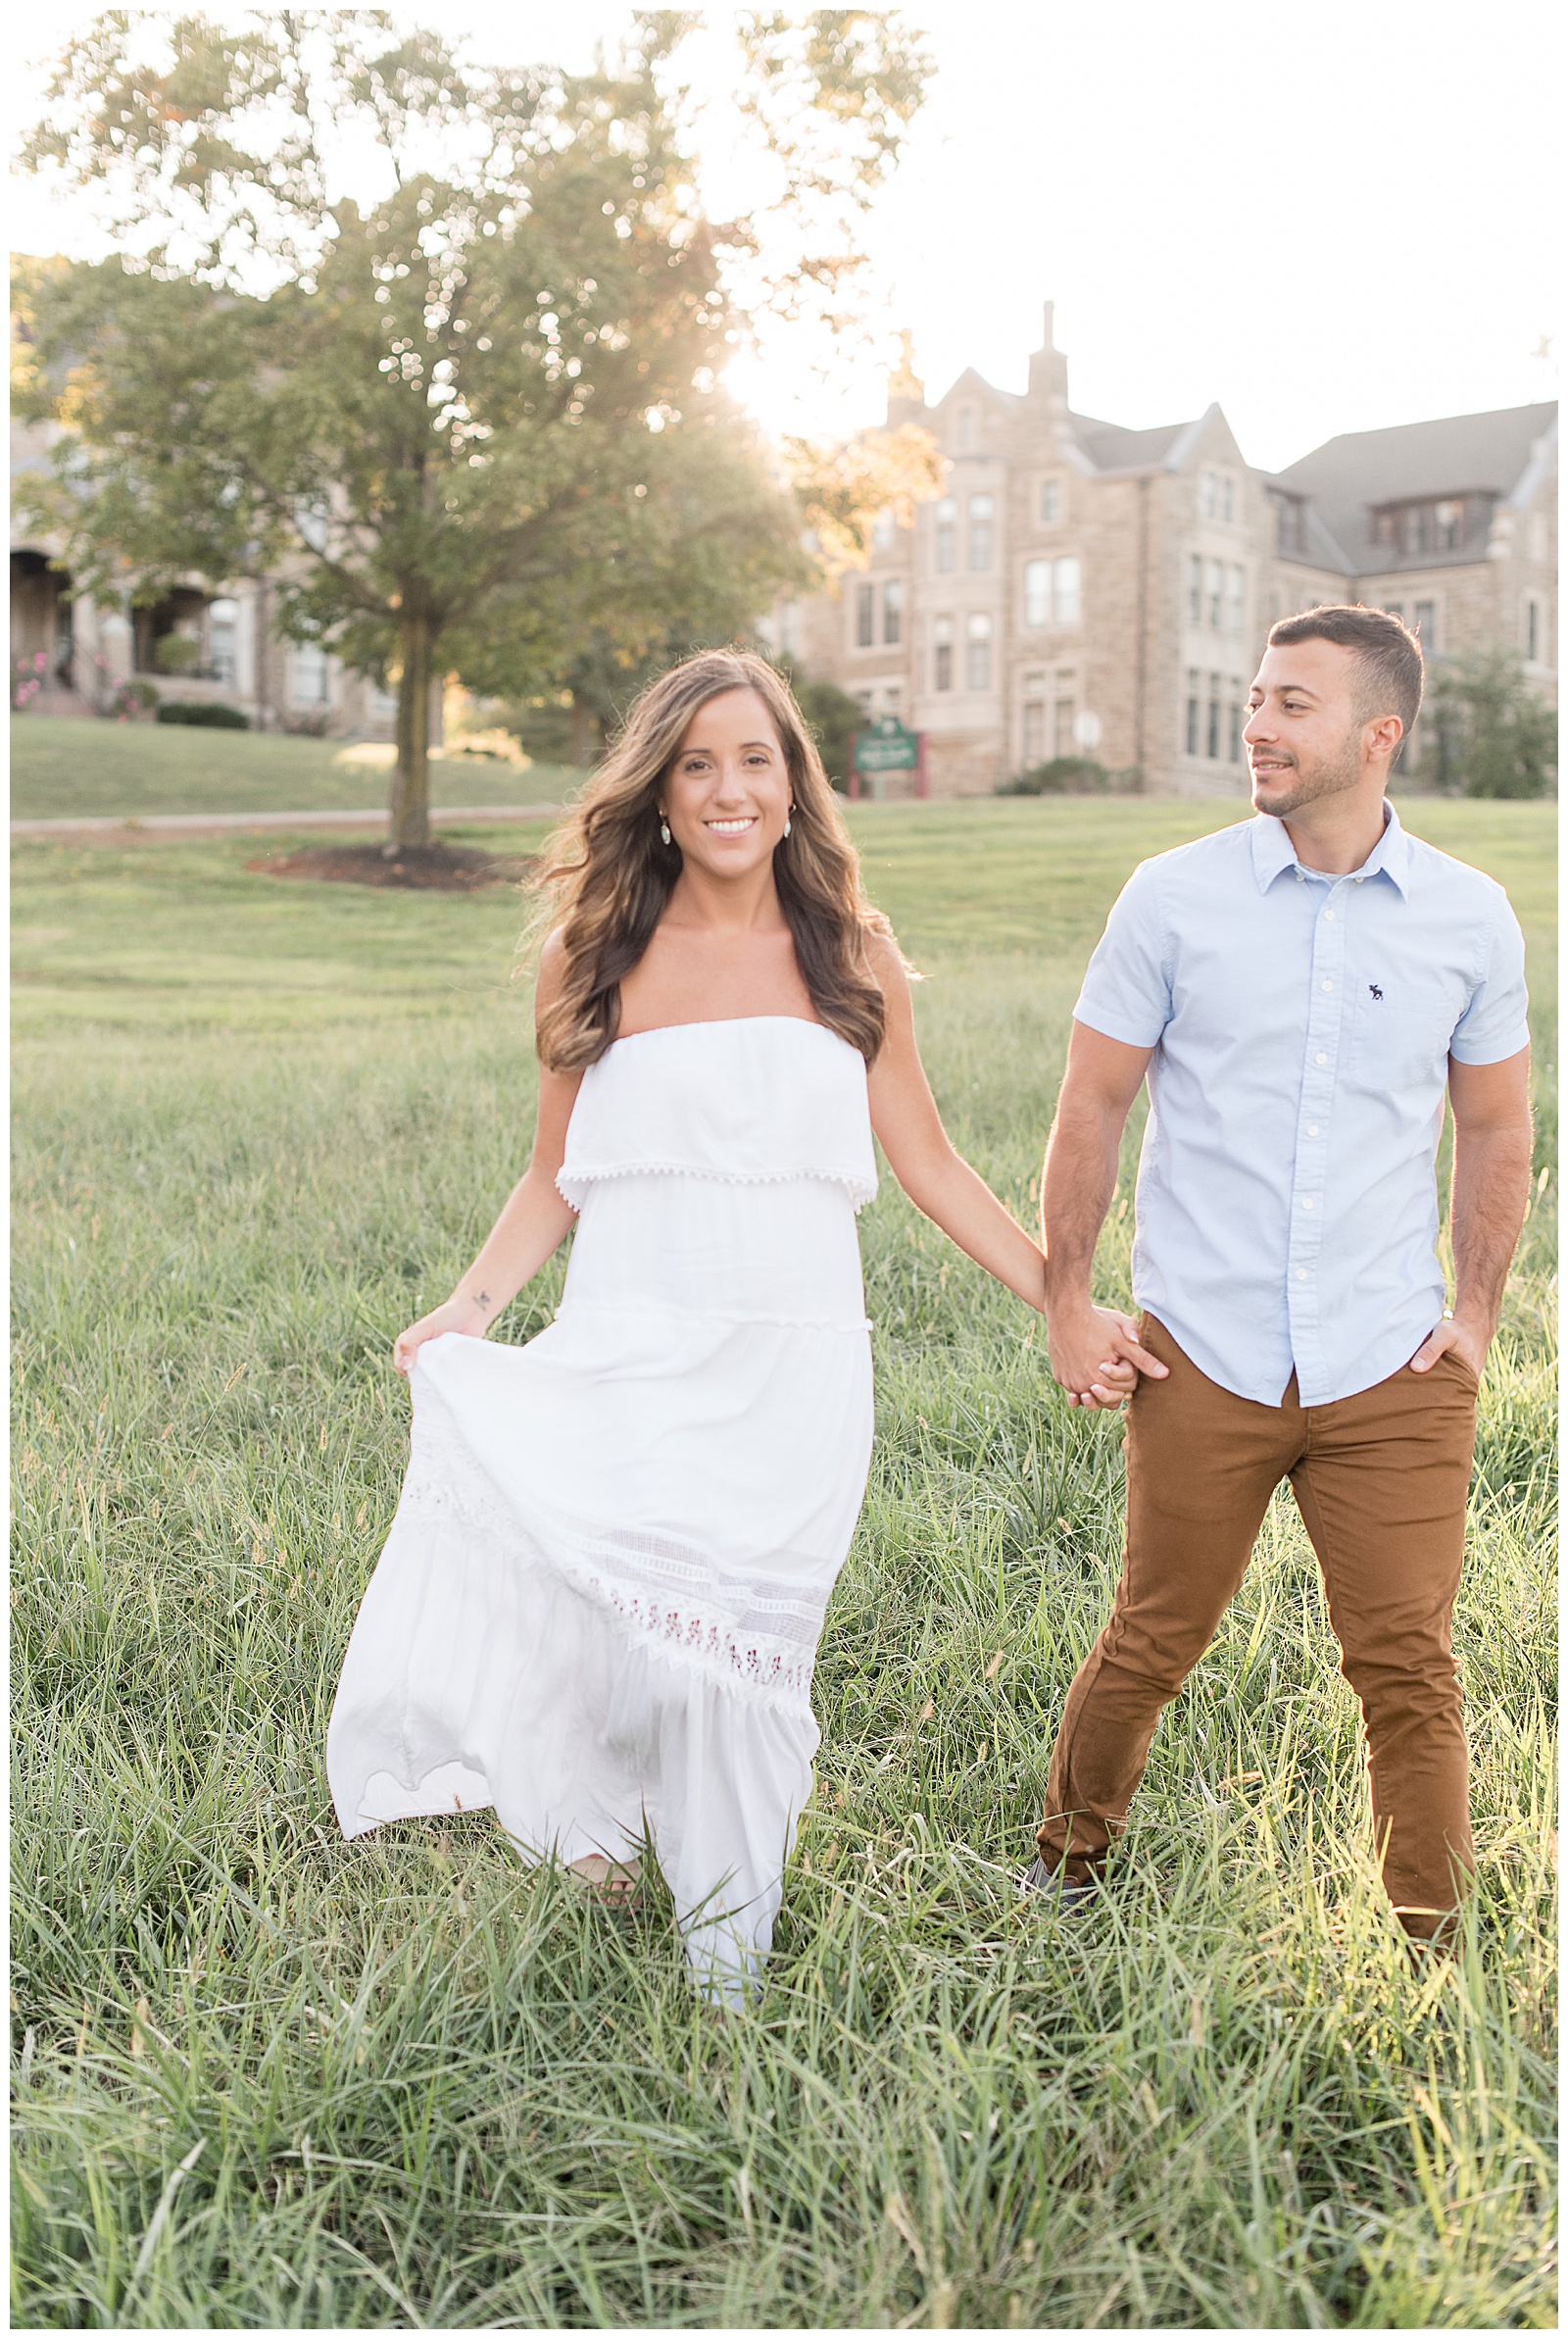 couple walking in open field of grass, as she smiles at the camera